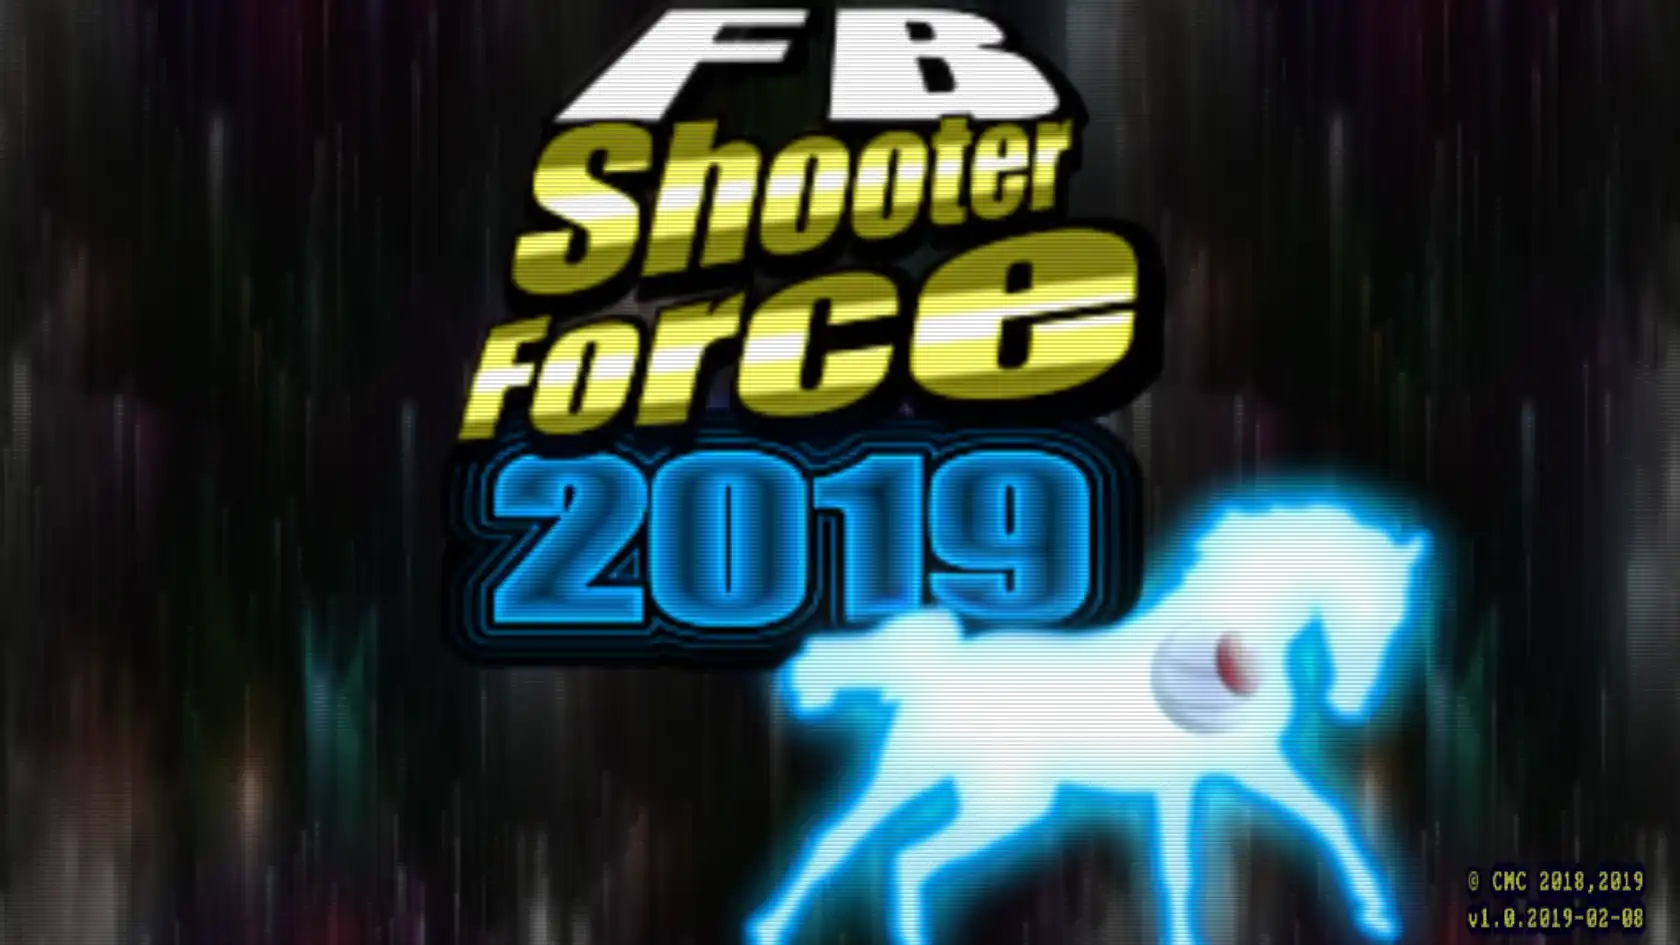 Download web tool or web app FB Shooter Force 2019 to run in Windows online over Linux online